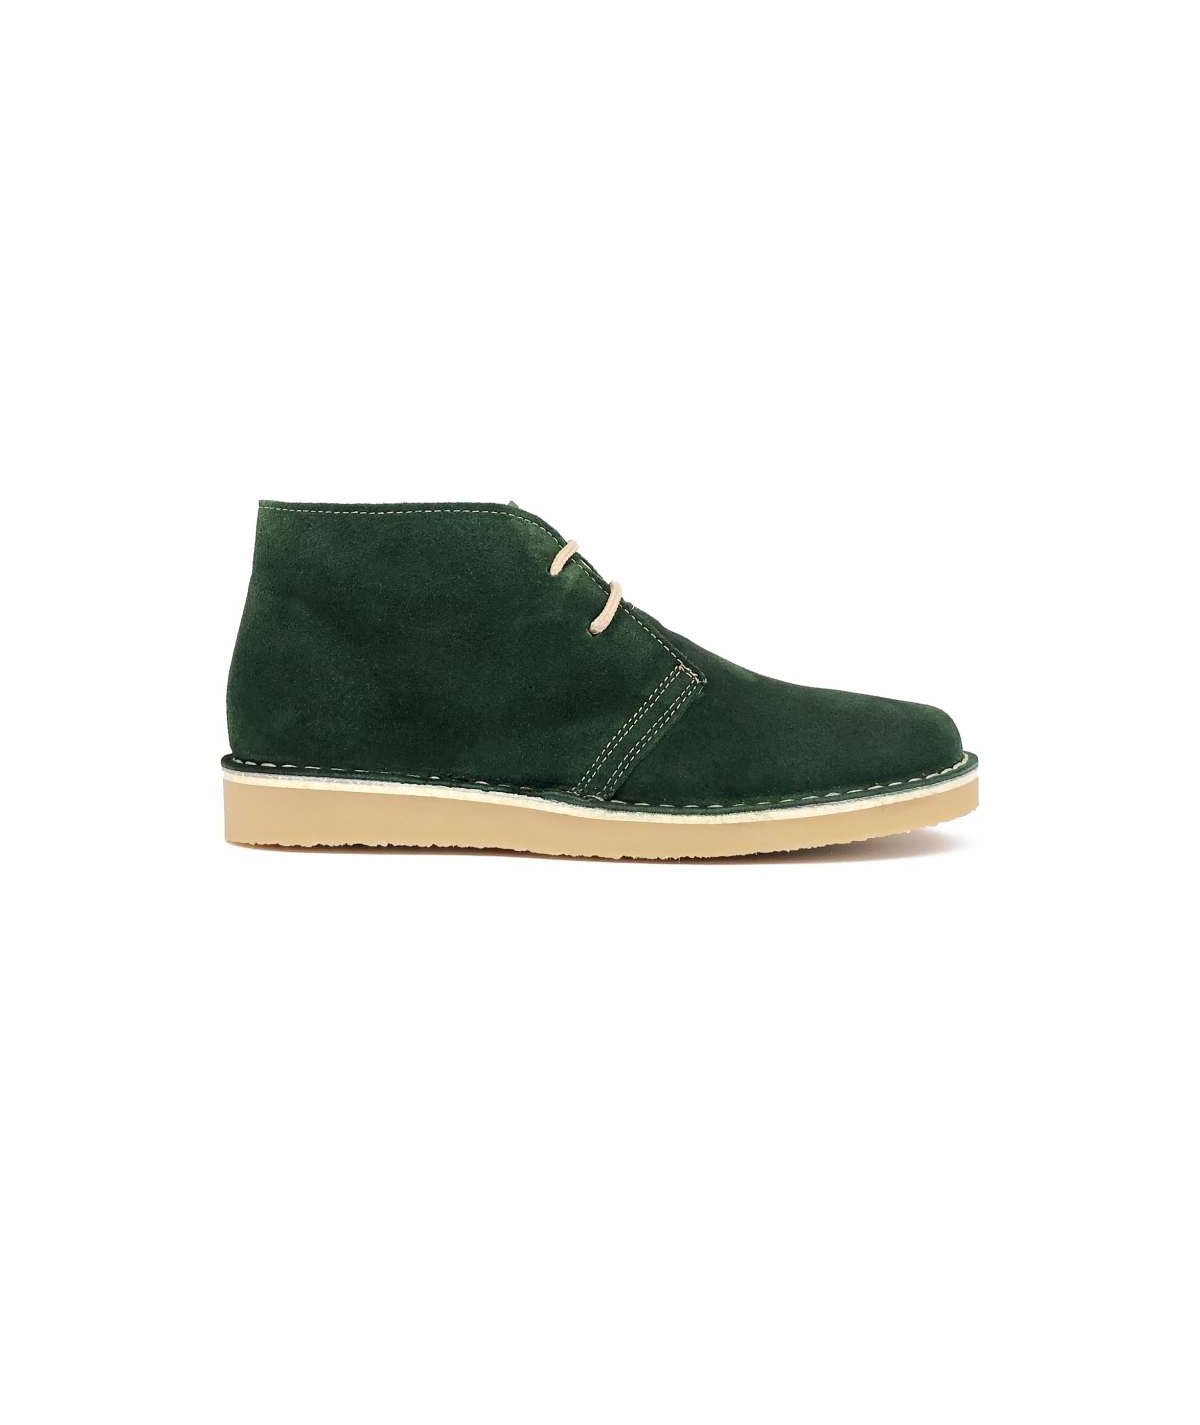 Men's green Desert Boots with Dover sole